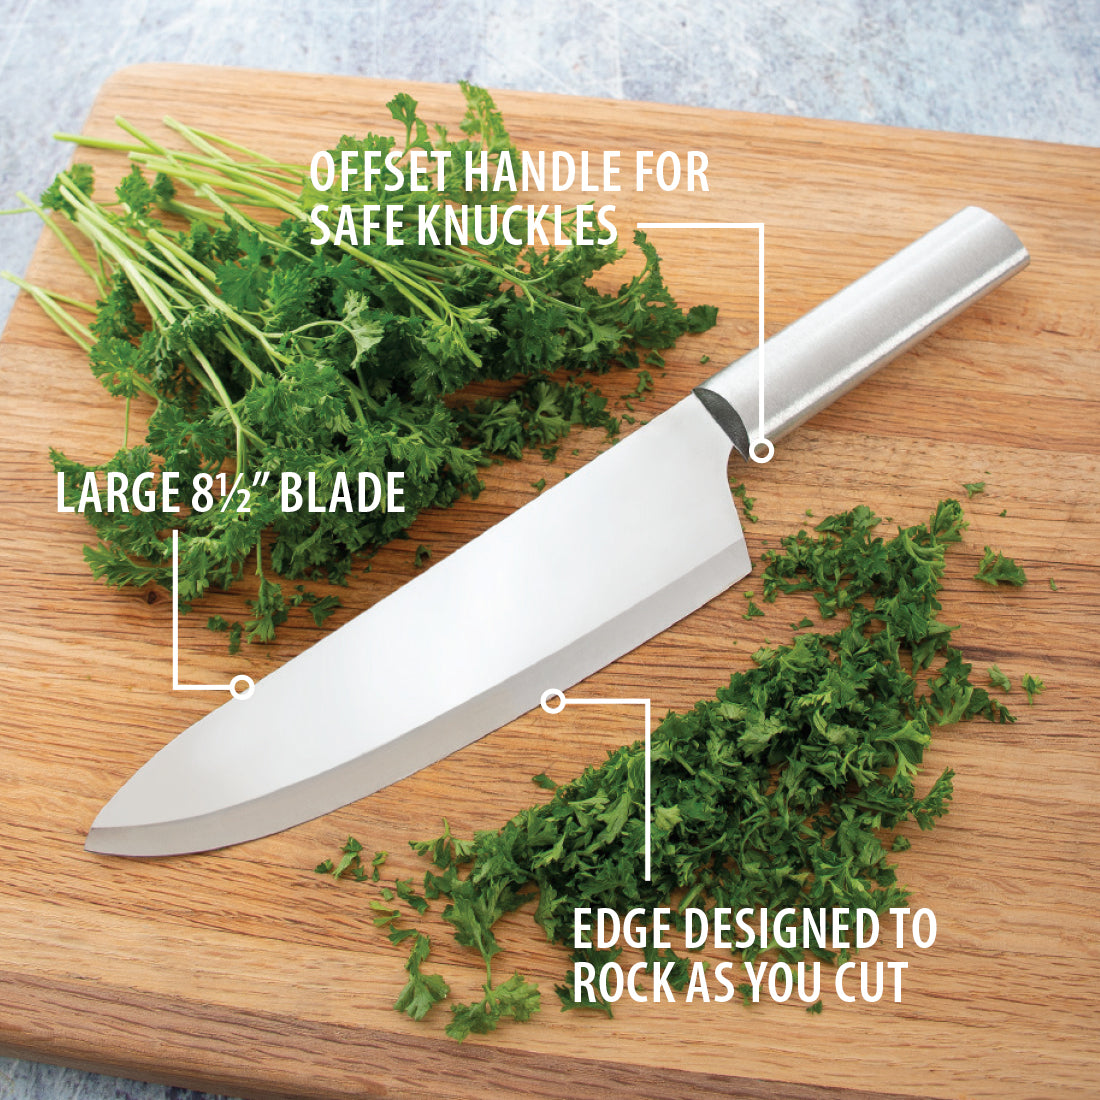 Kitchen Tool, ICEL 4-inch Serrated Paring Knife, Green 